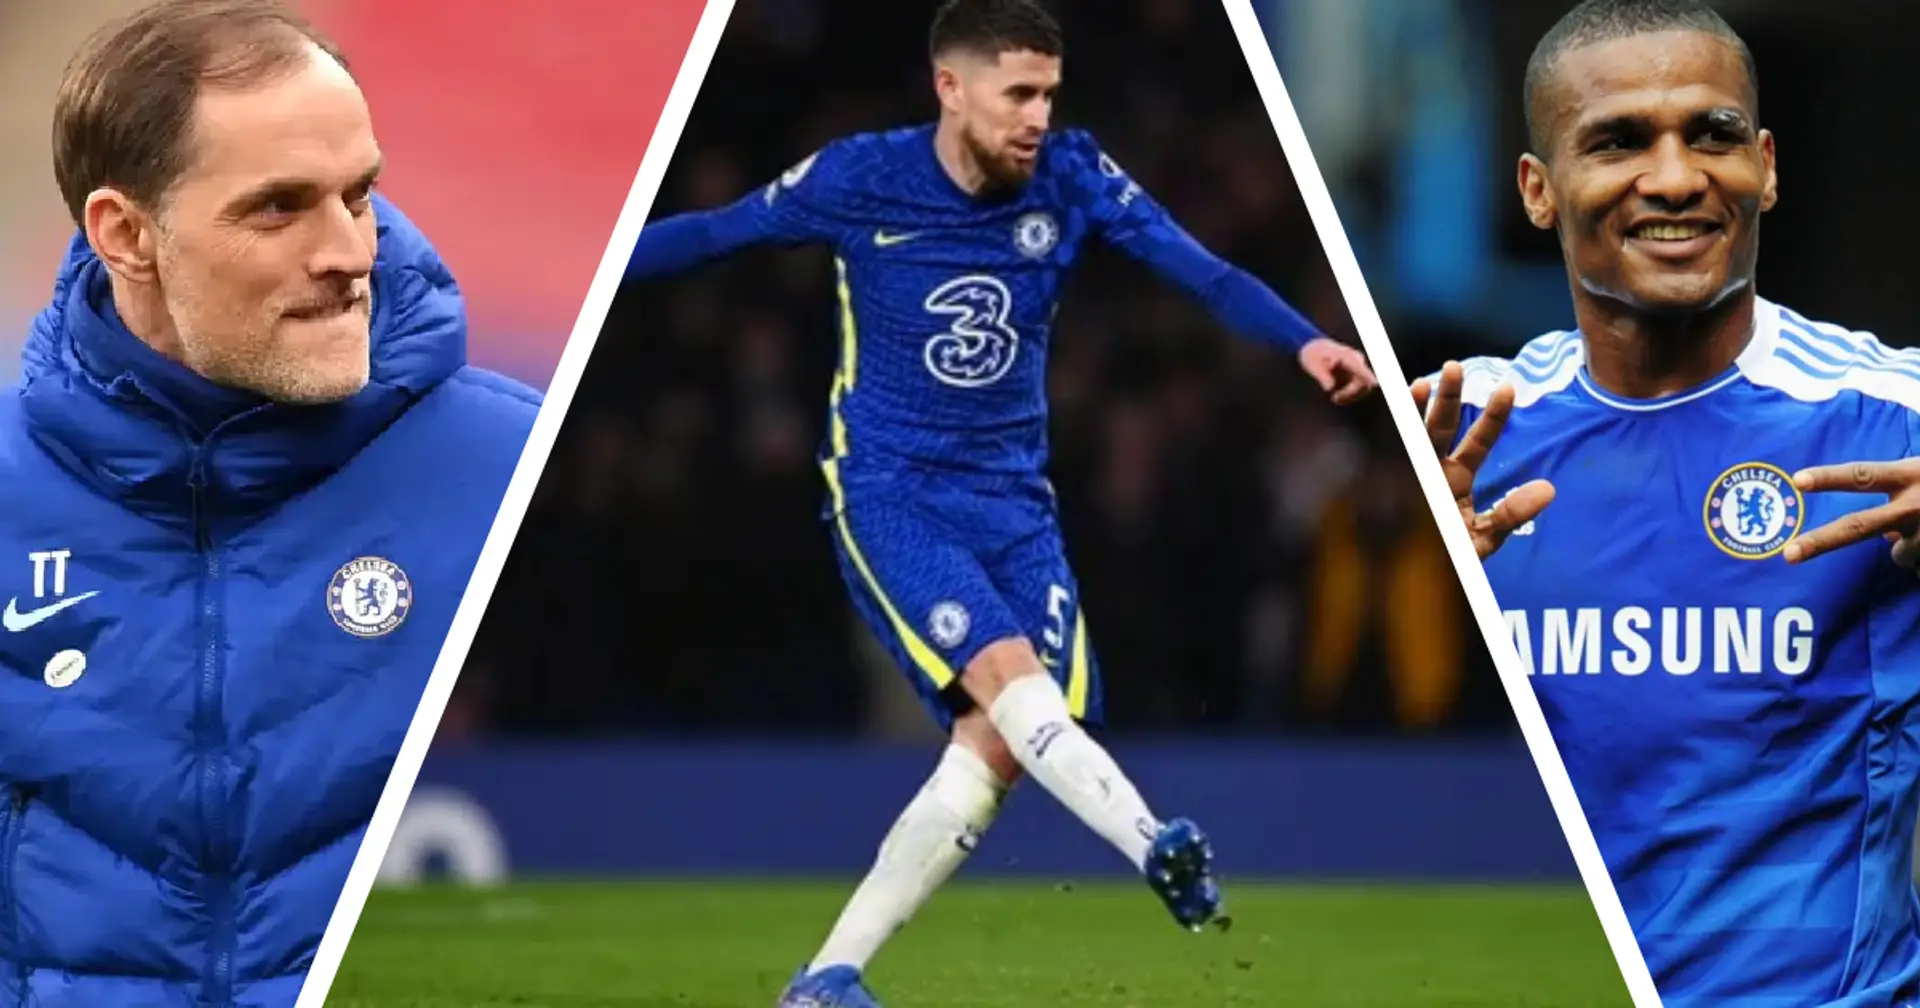 Clutch as can be: Jorginho winner Chelsea's first since 2009 in one specific category